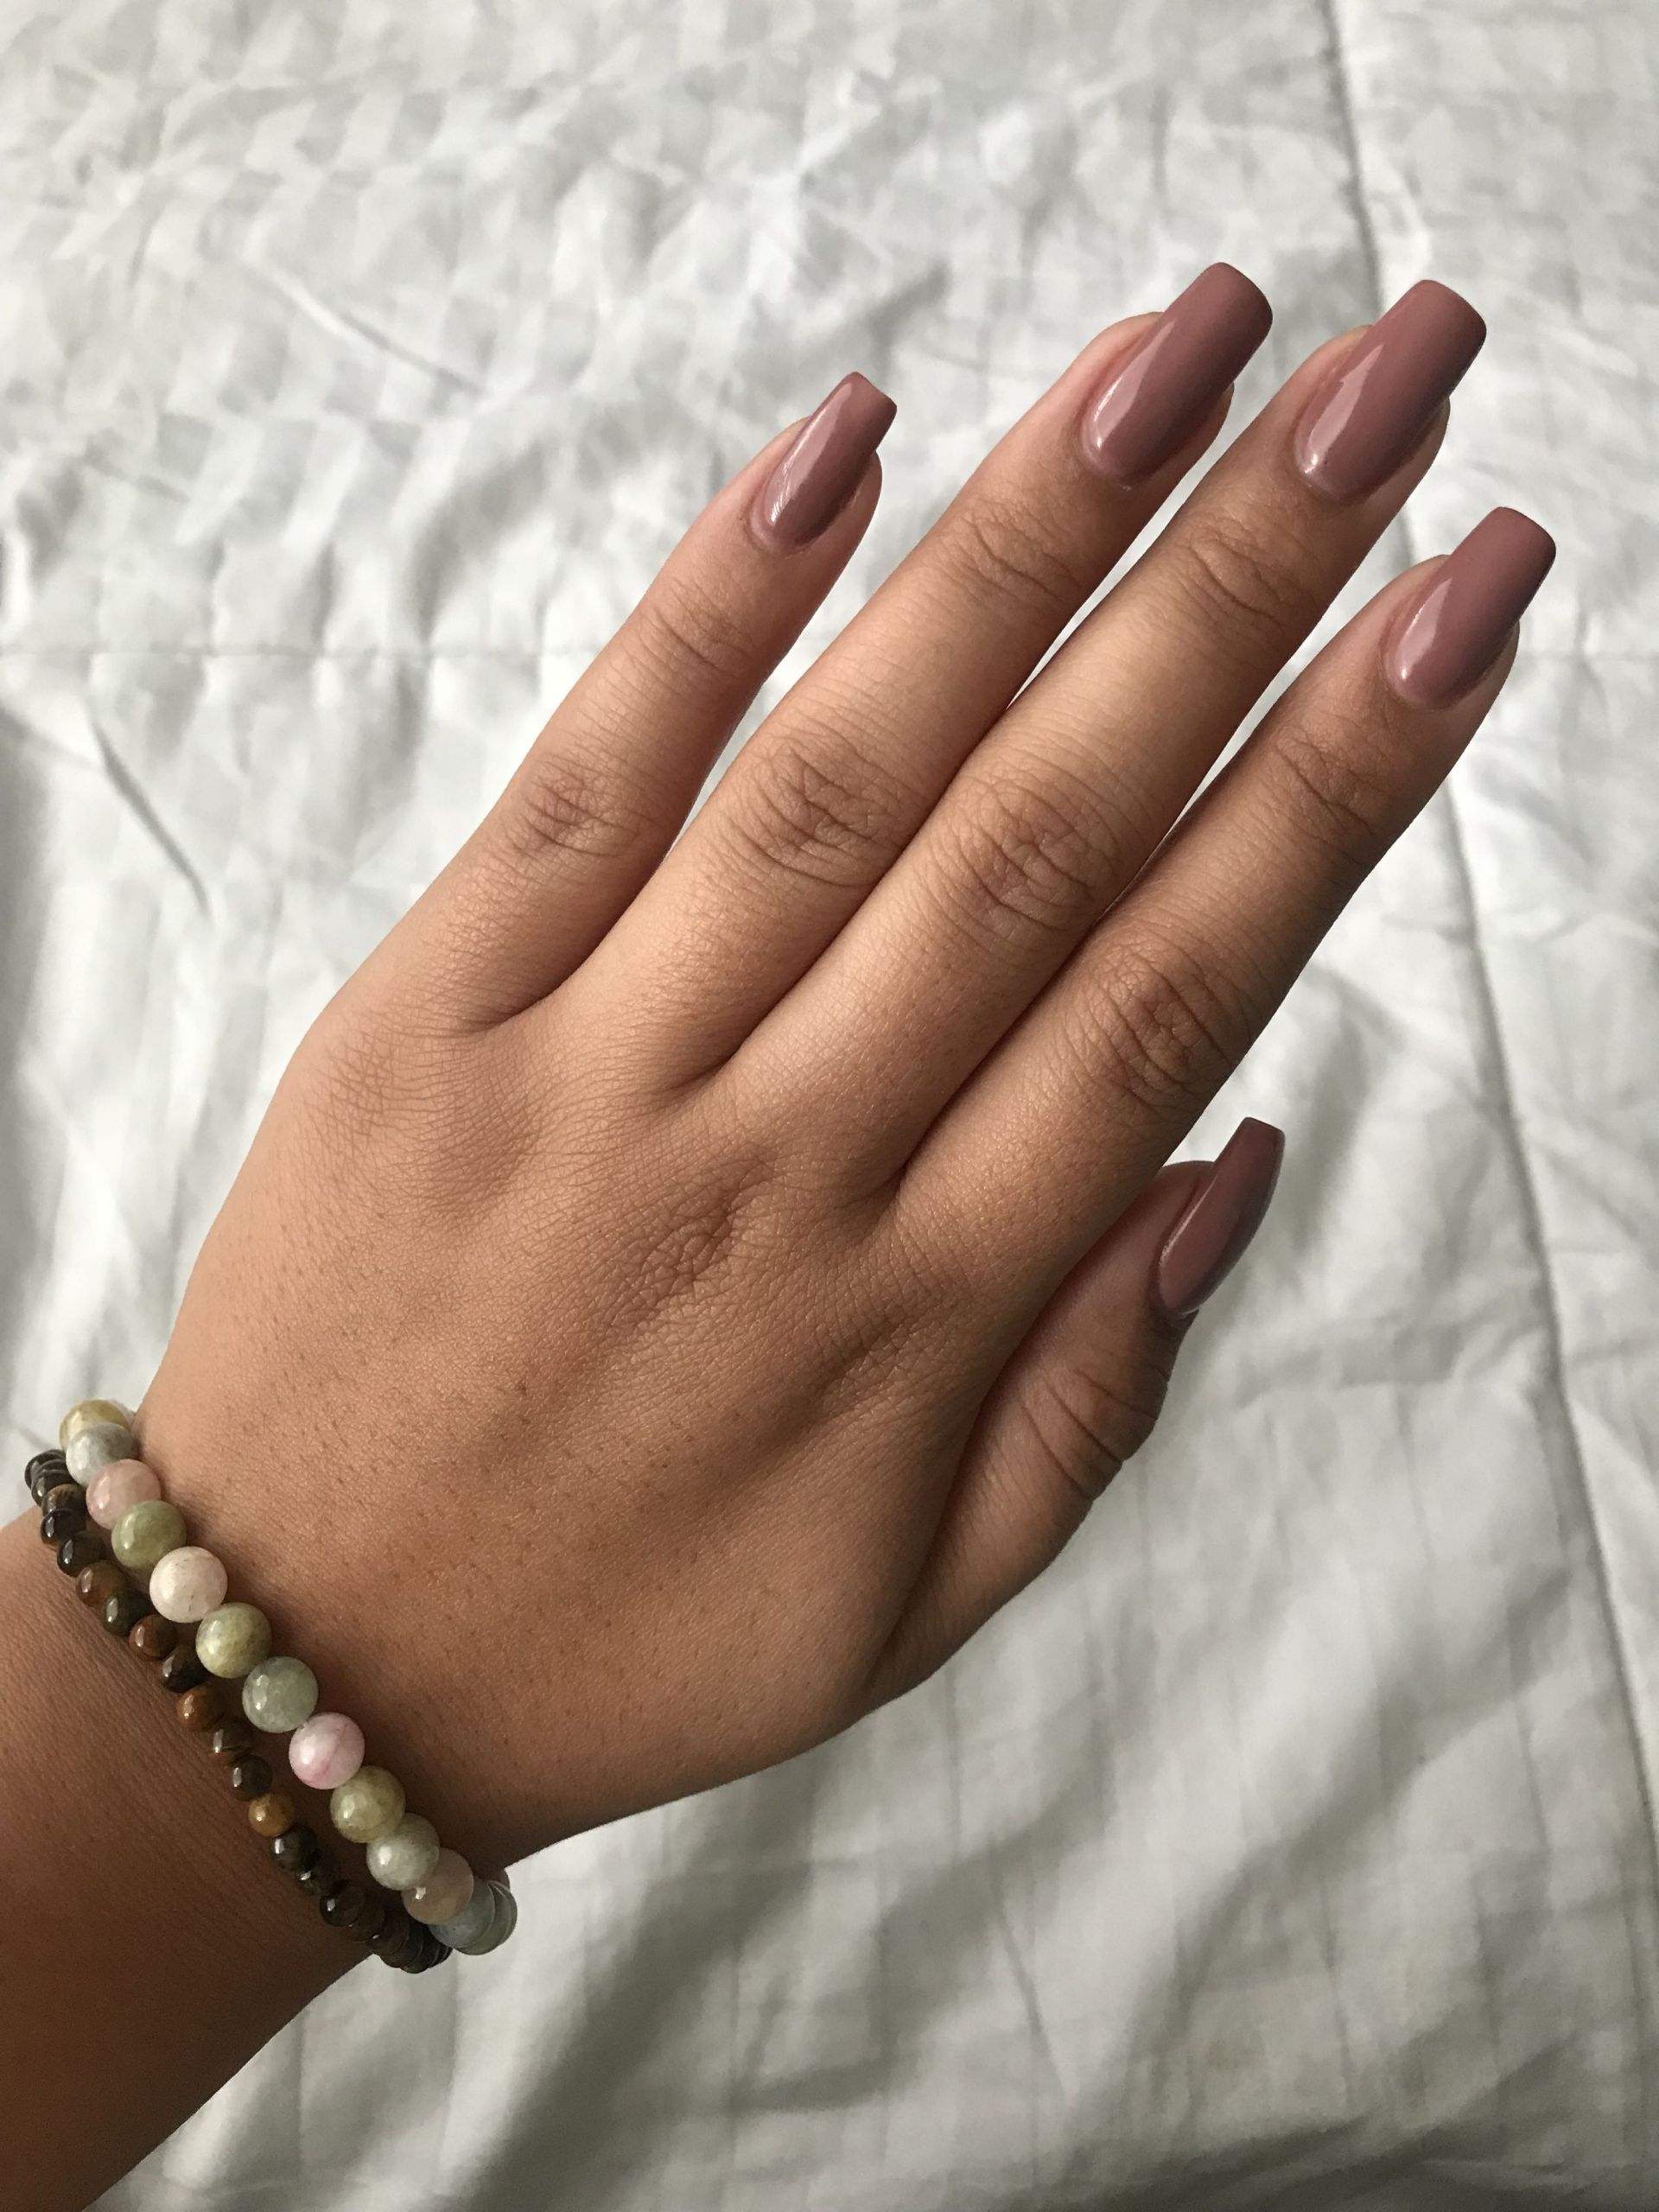 Nail Colors January 2020
 Acrylic nails OPI Color butternut squash in 2020